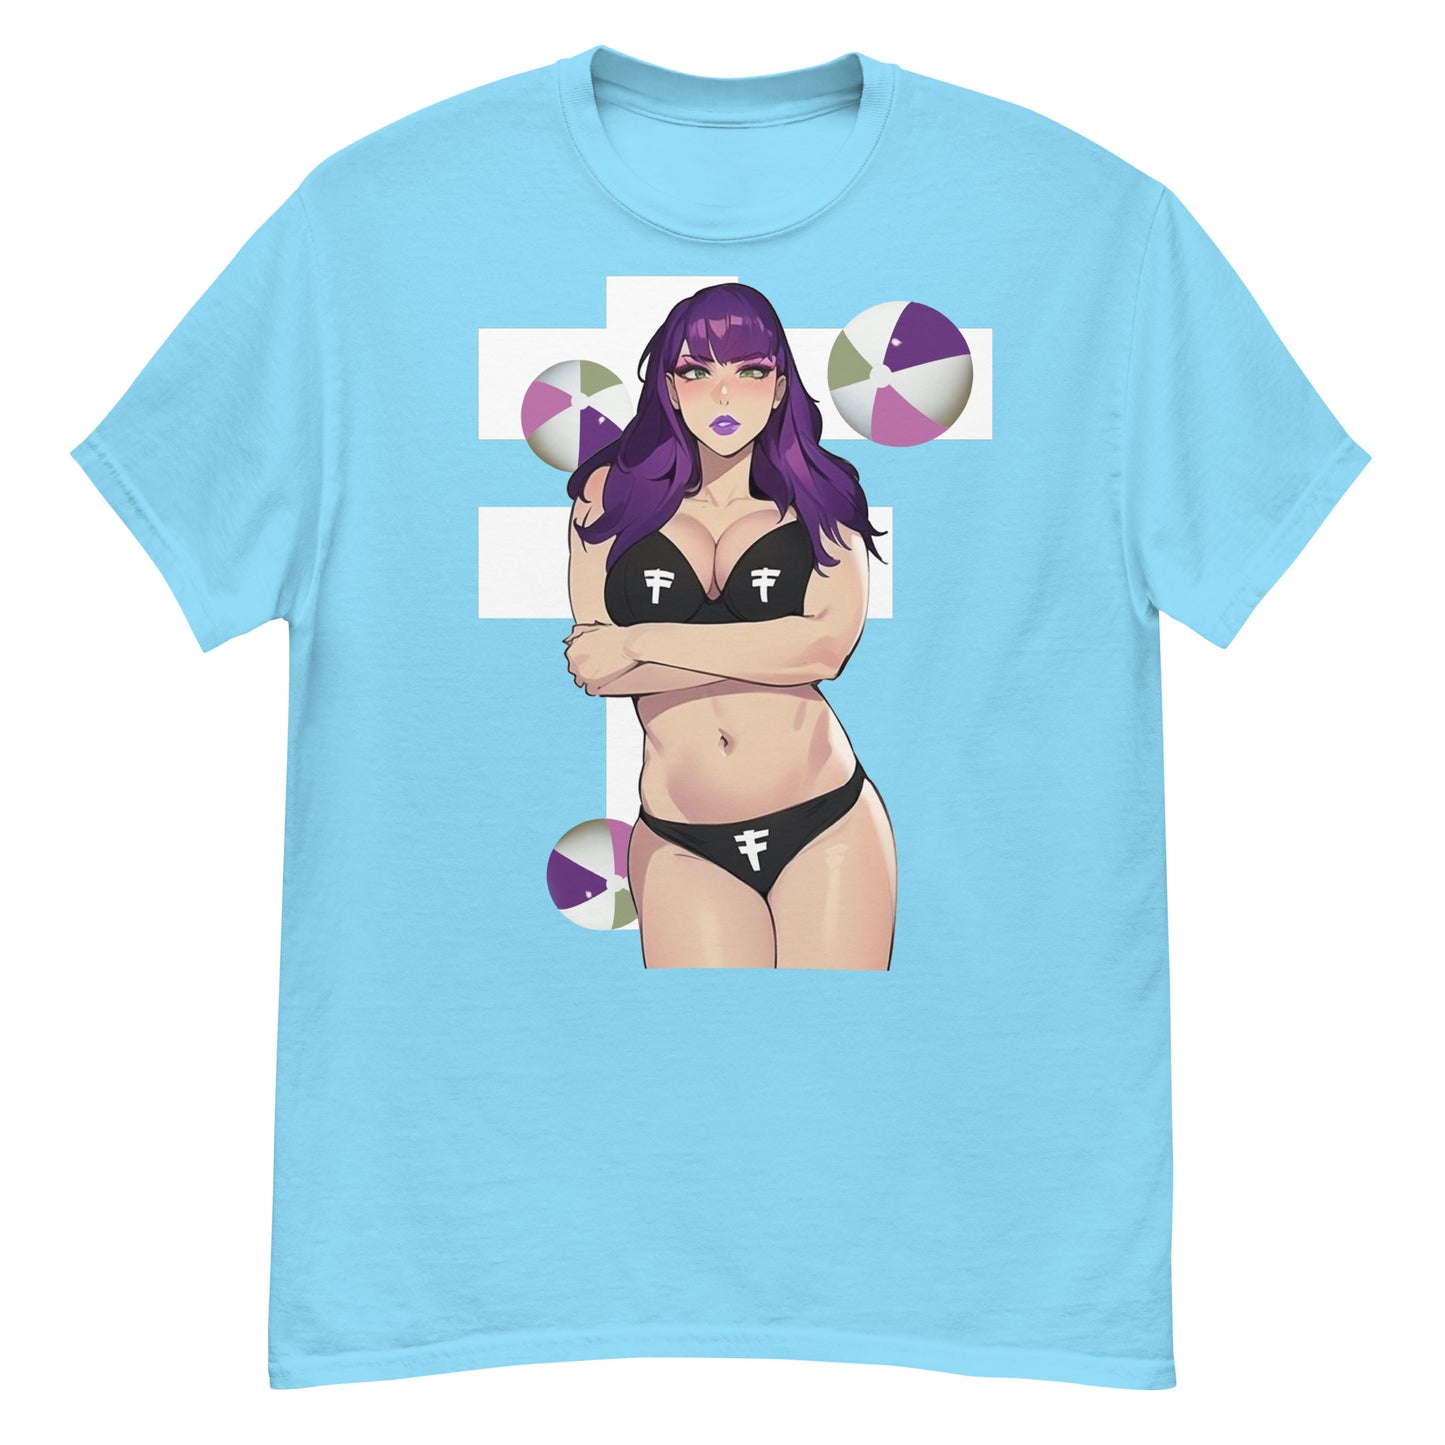 GOTH GIRL GOES TO THE BEACH (GRAPHIC TEE)